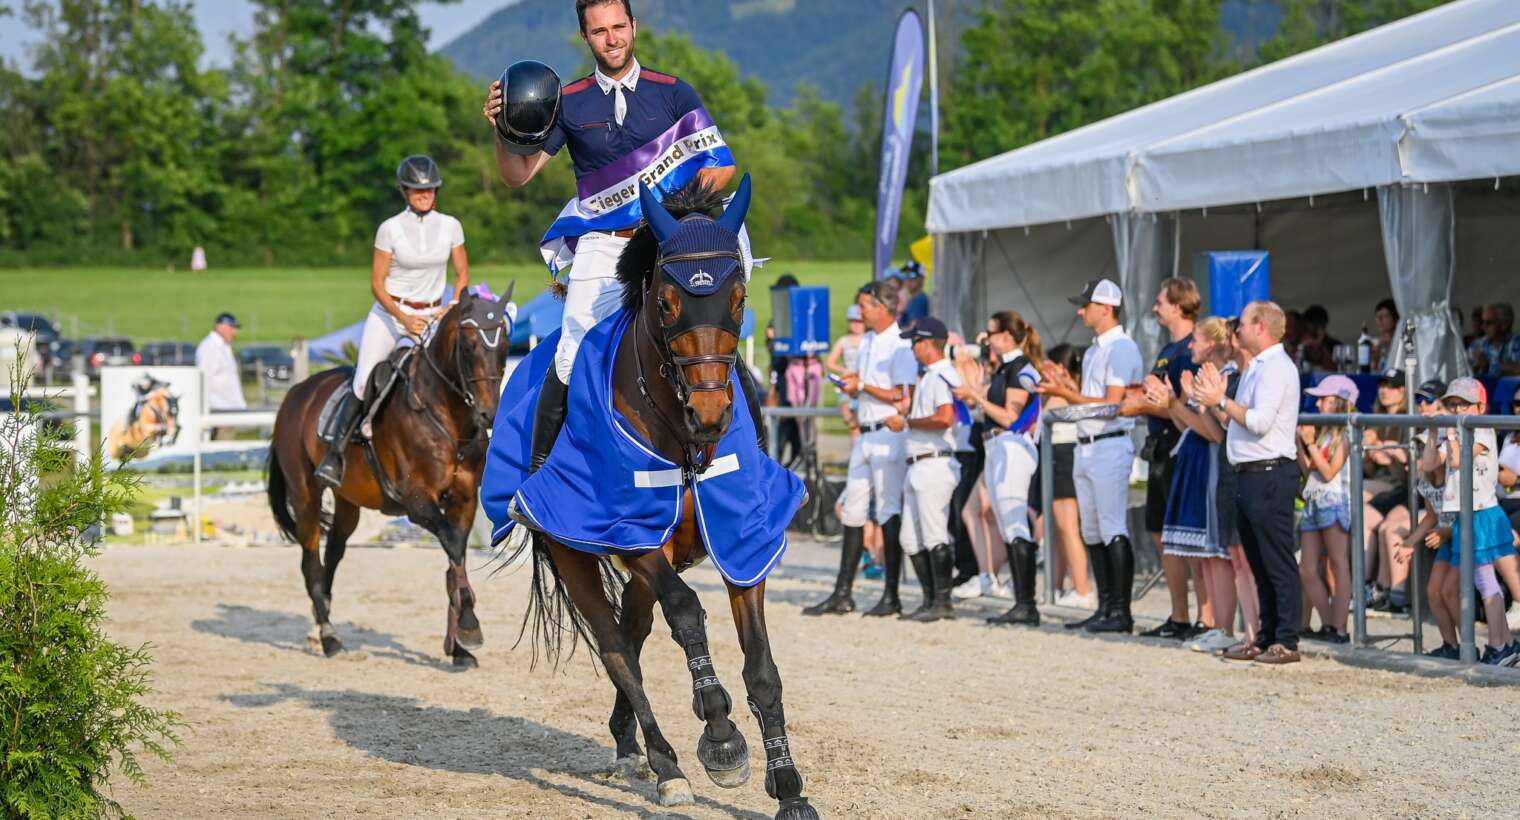 Three horses from the Pius Schwizer stable placed in the Grand Prix of Galgenen